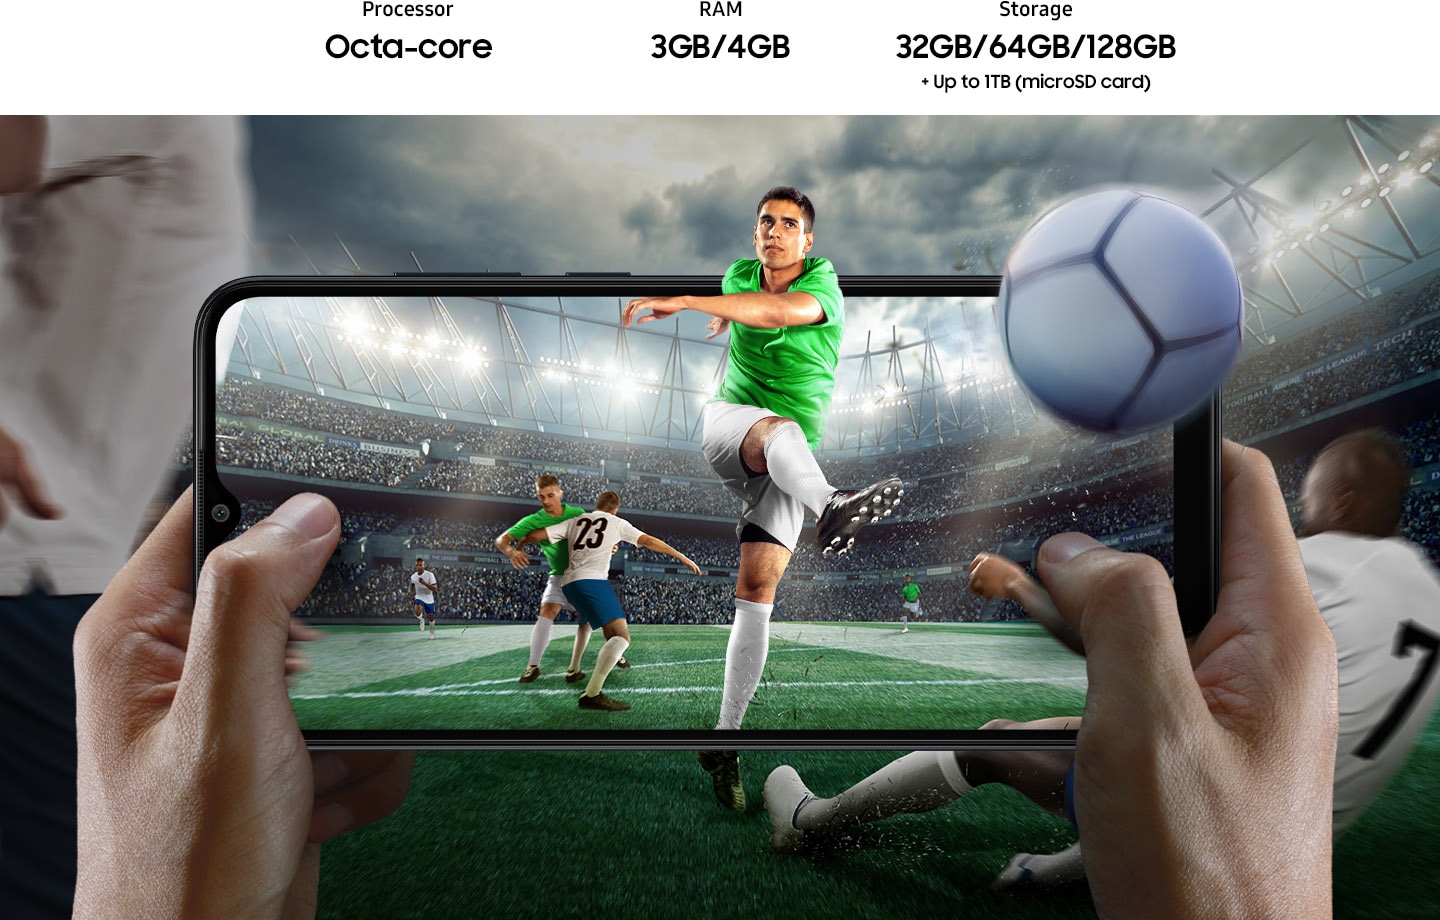 A football player, kicking a ball at a stadium during a football game, is shown on Galaxy A04e in landscape, held by two hands. The player, ball and the rest of the picture extend outside of the device's screen in all directions. Storage options include 32GB, 64GB and 128GB, and up to 1TB external storage.